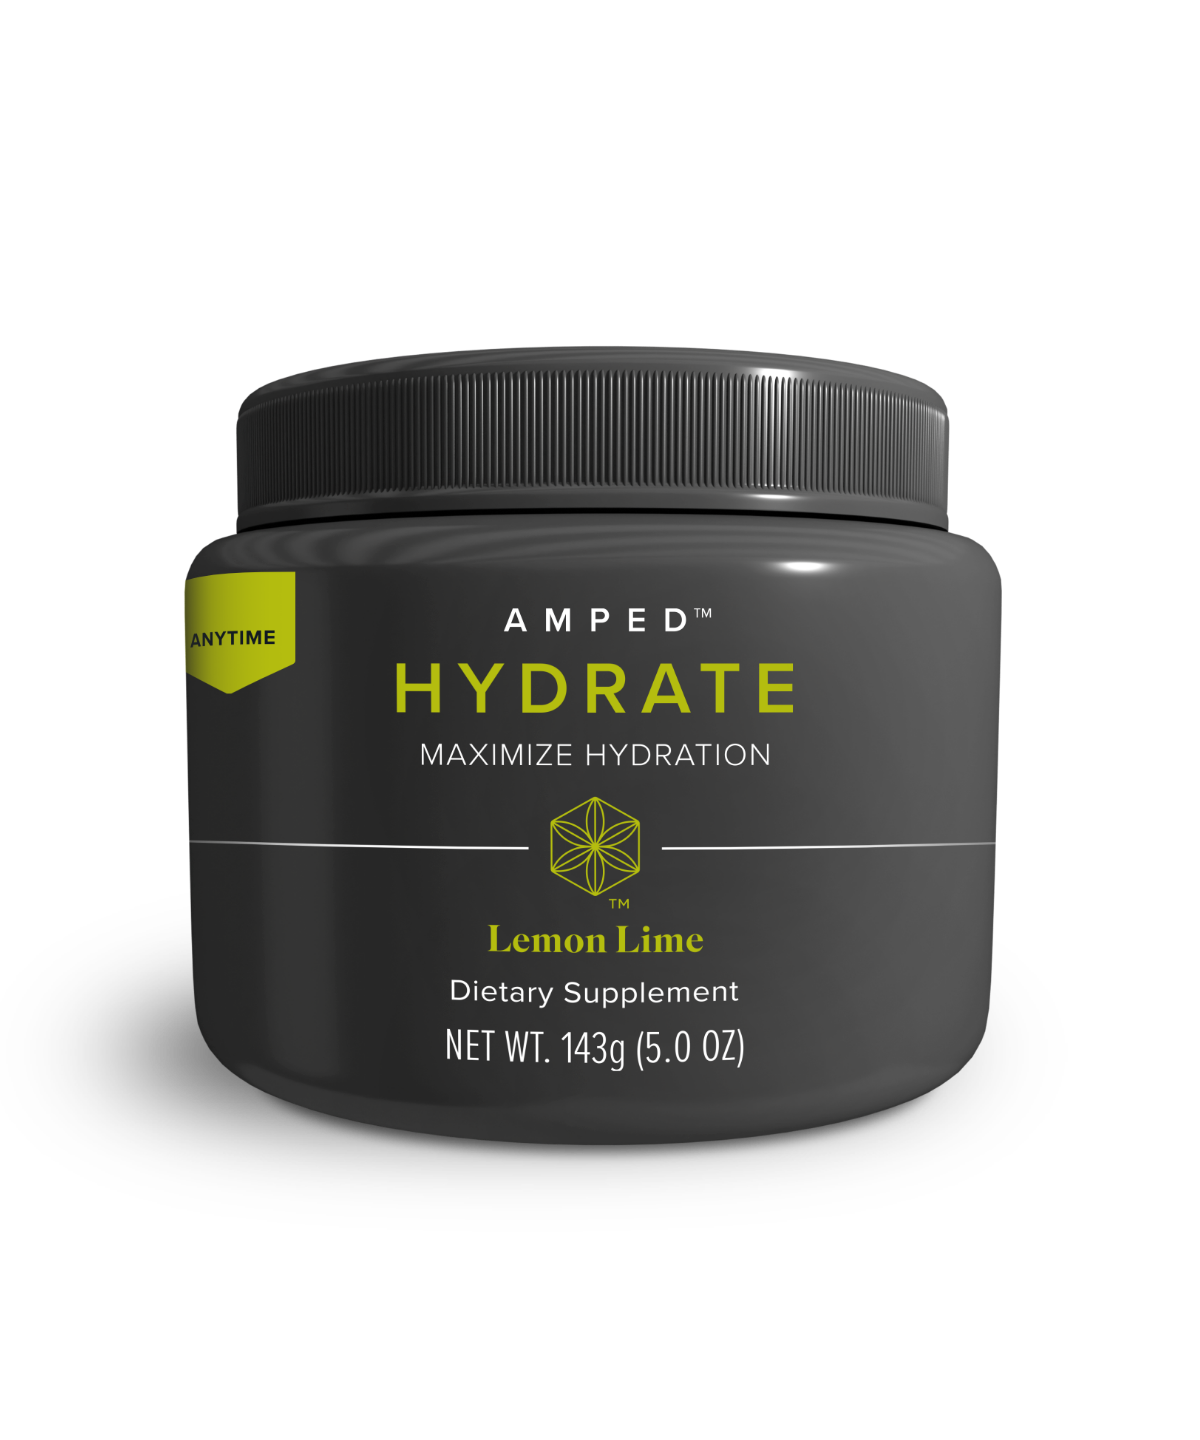 AMPED™ Hydrate Lemon Lime Canister